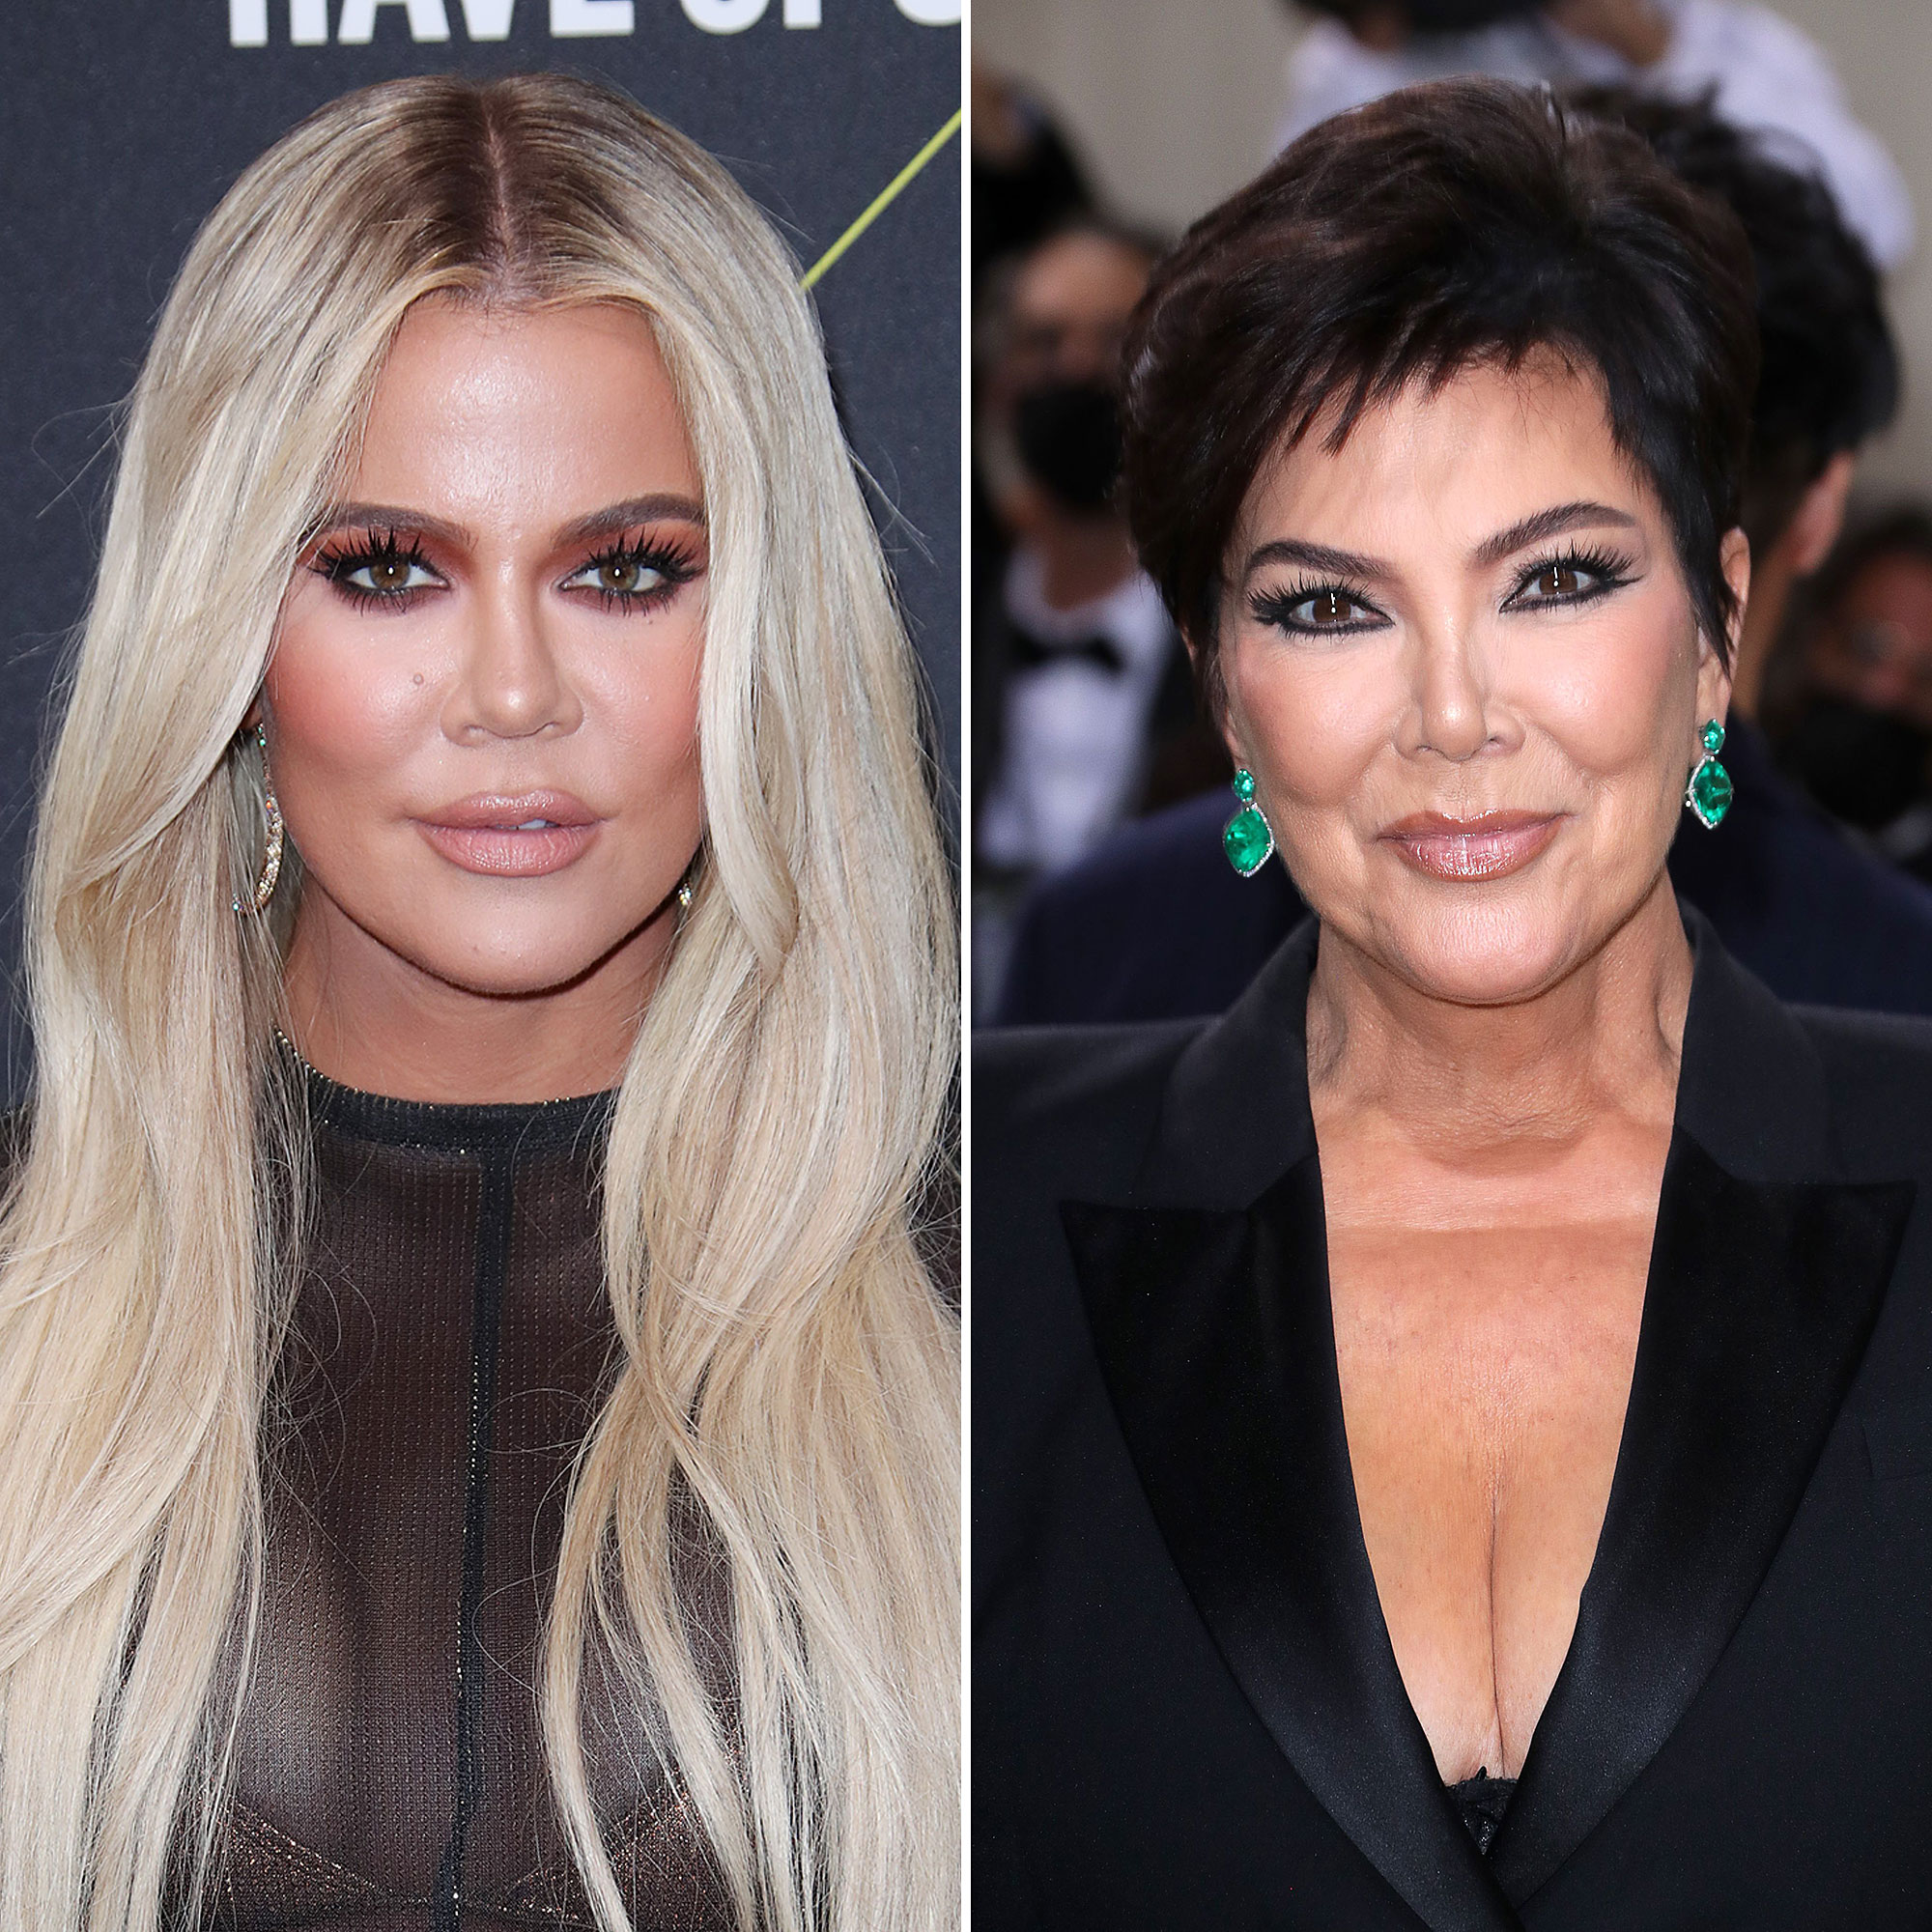 Khloe Kardashian – With Kris Jenner Leave Kendall and Kylie